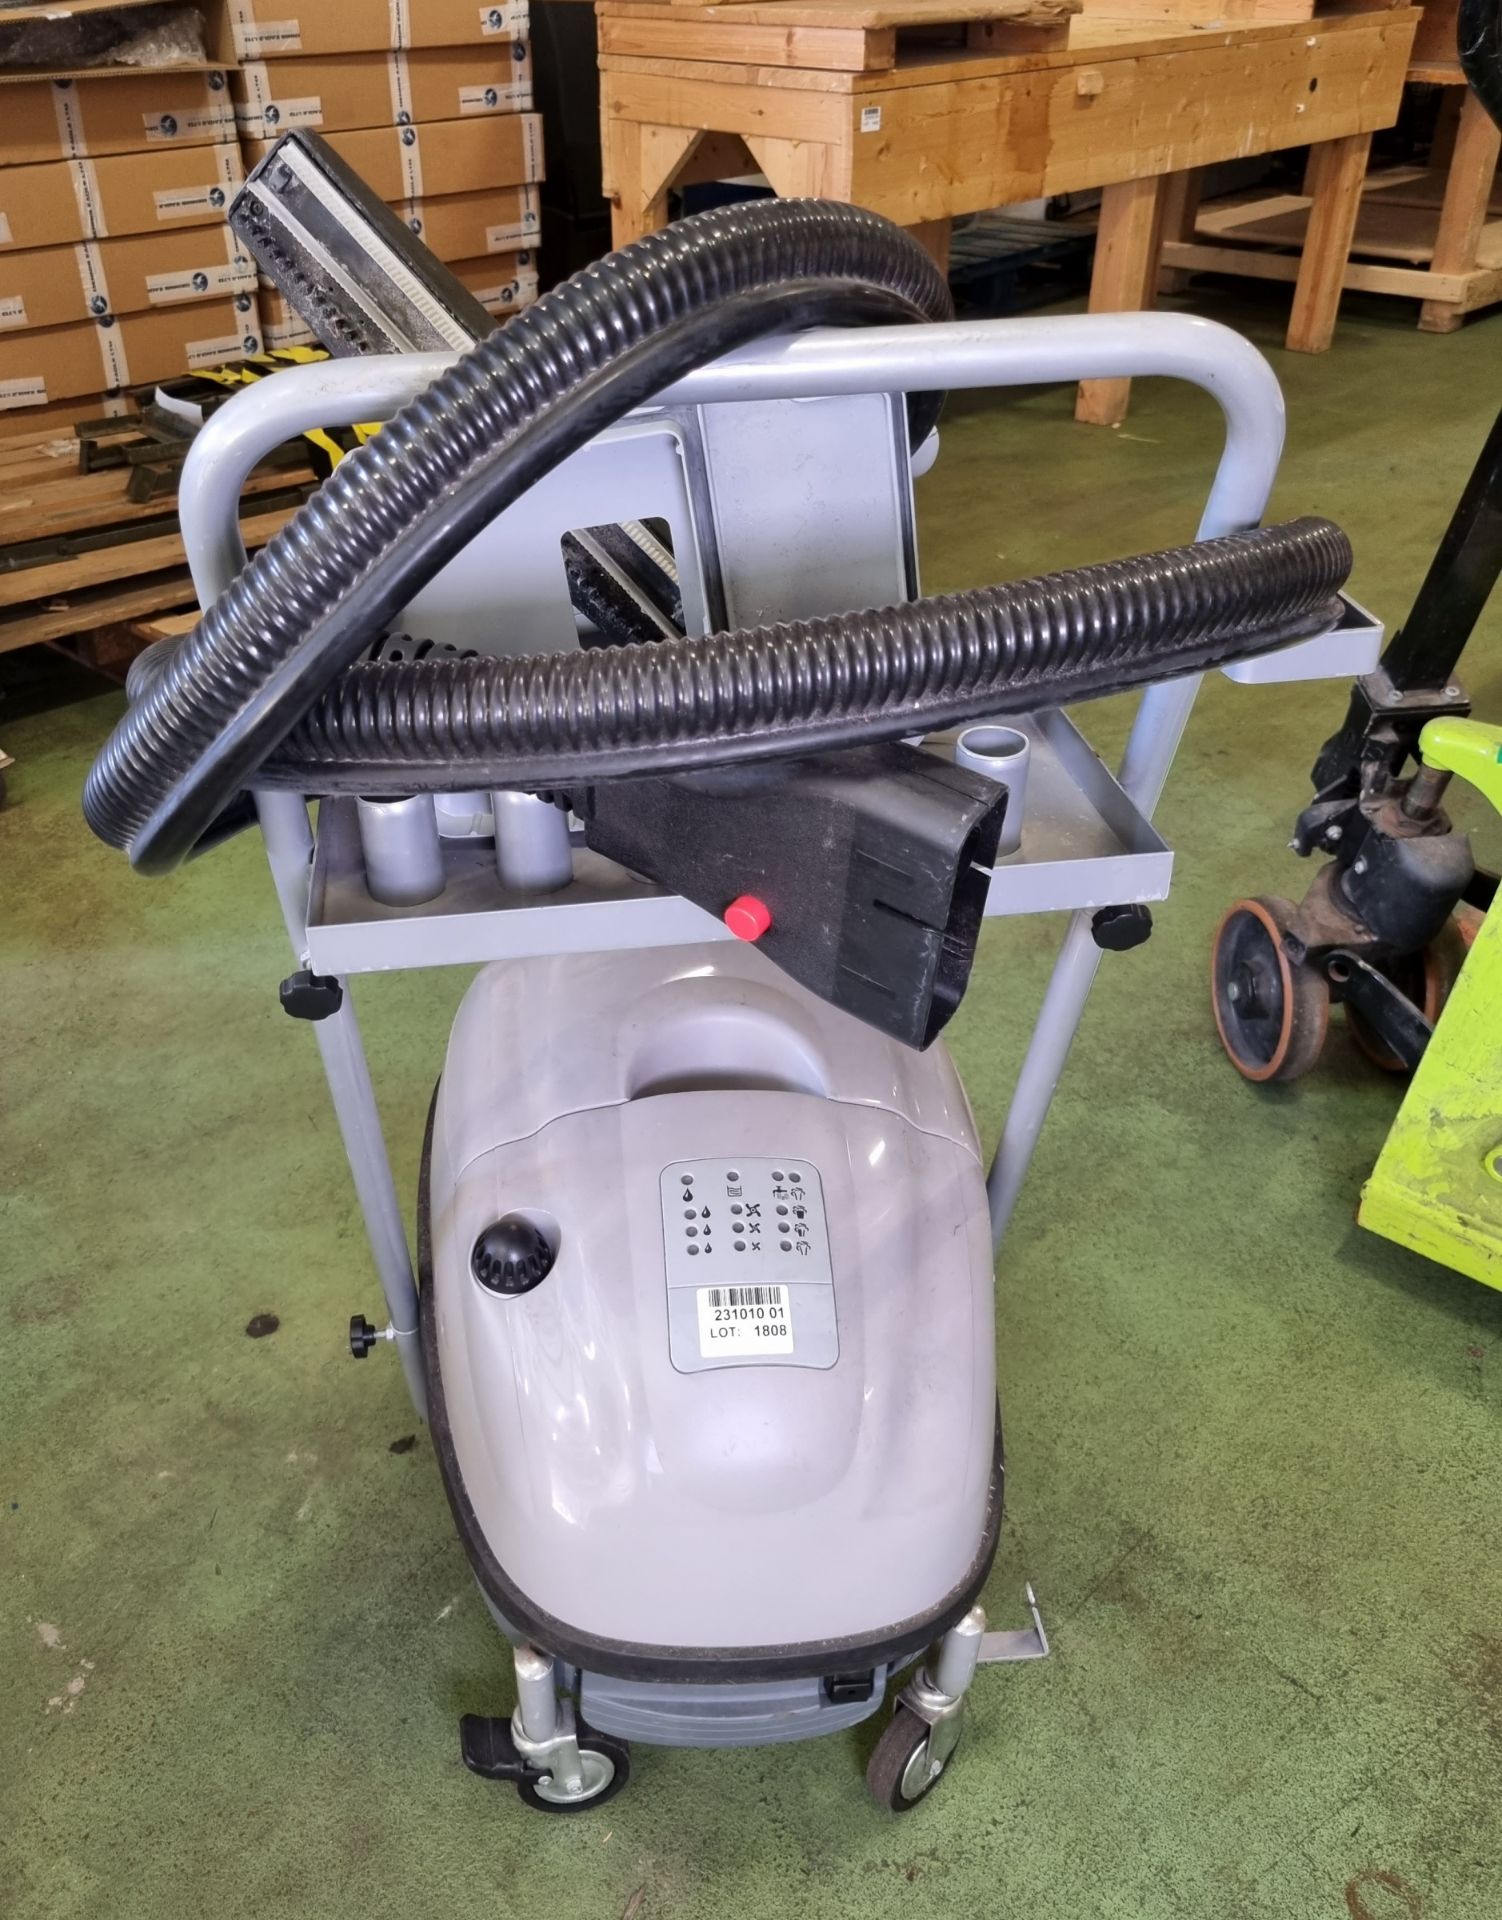 KS group IPX4 steam cleaner with trolley - 230V - 50hz - L 650 x W 430 x H 970mm - Incomplete - Image 2 of 4